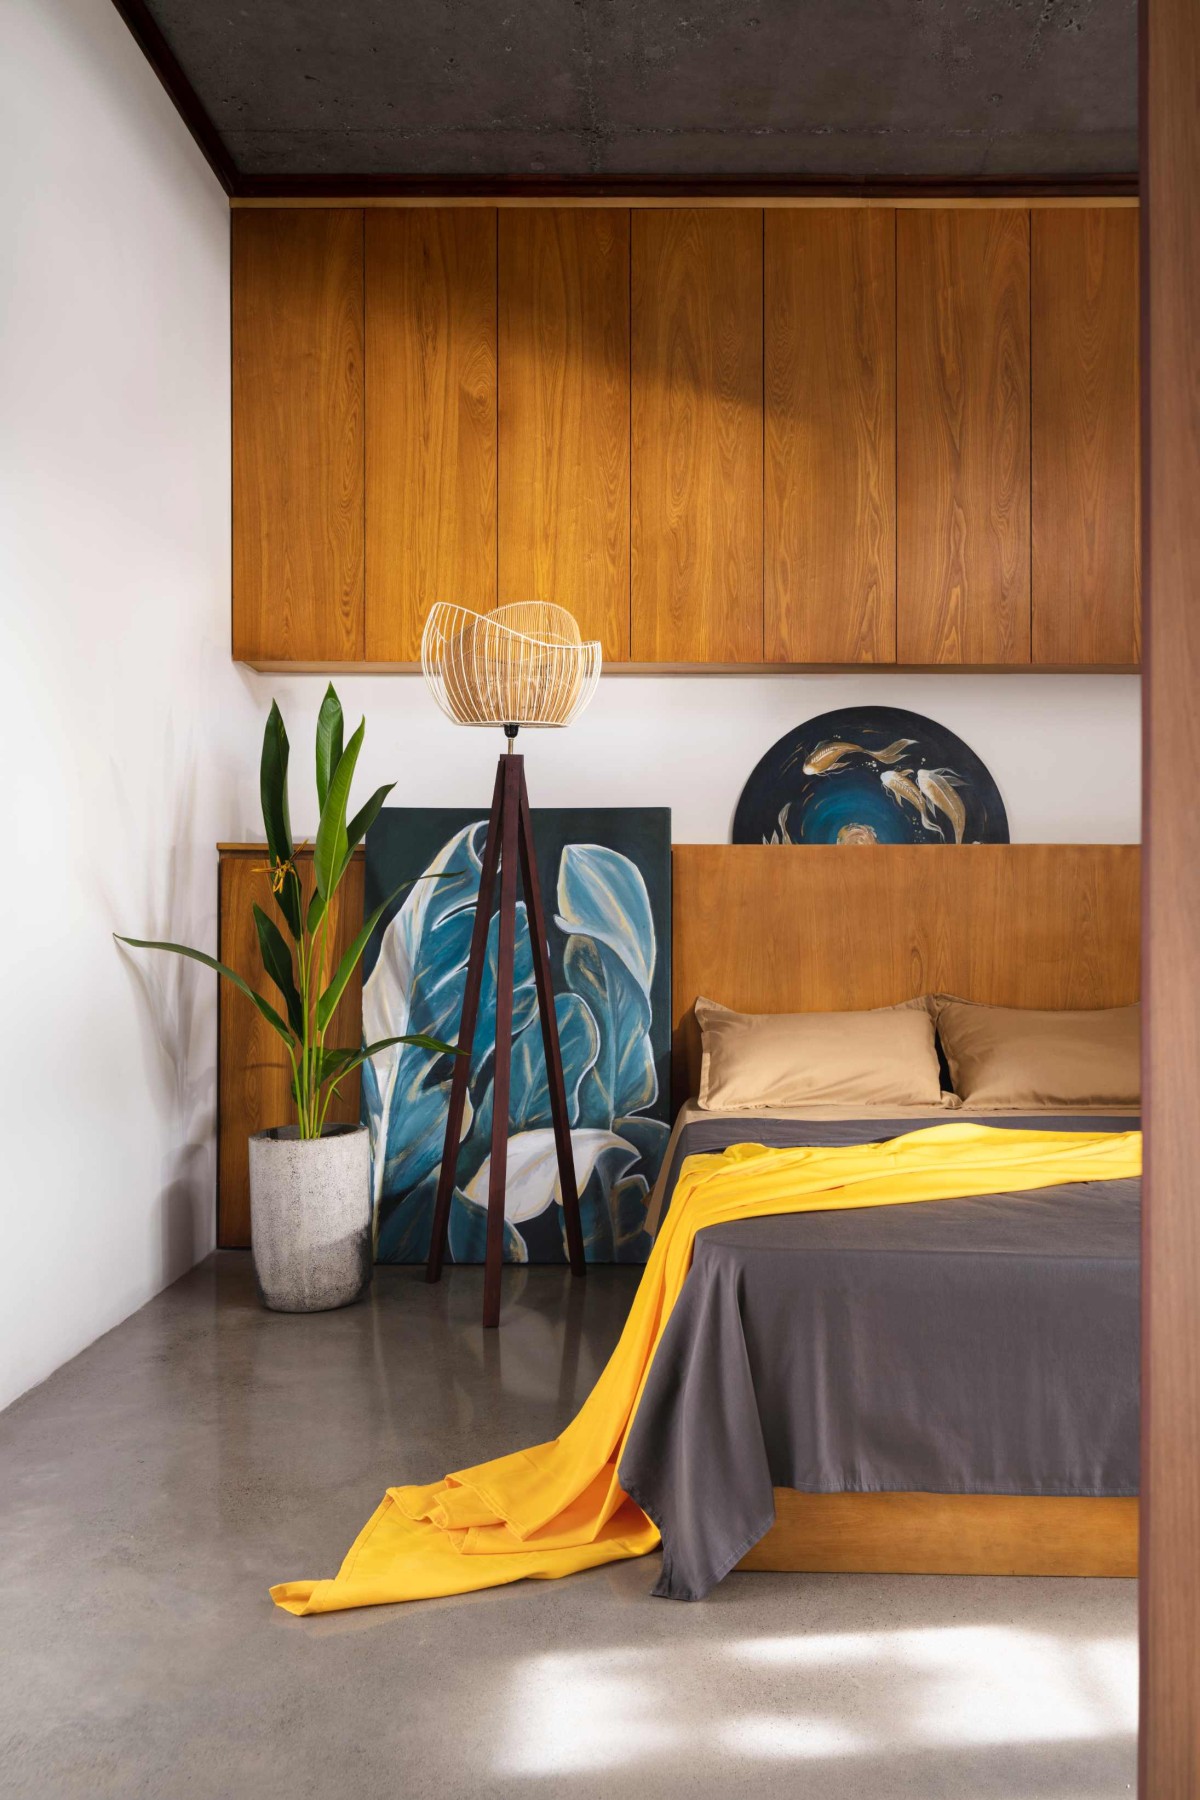 Bedroom 2 of Celandine by 7th Hue Architecture Studio